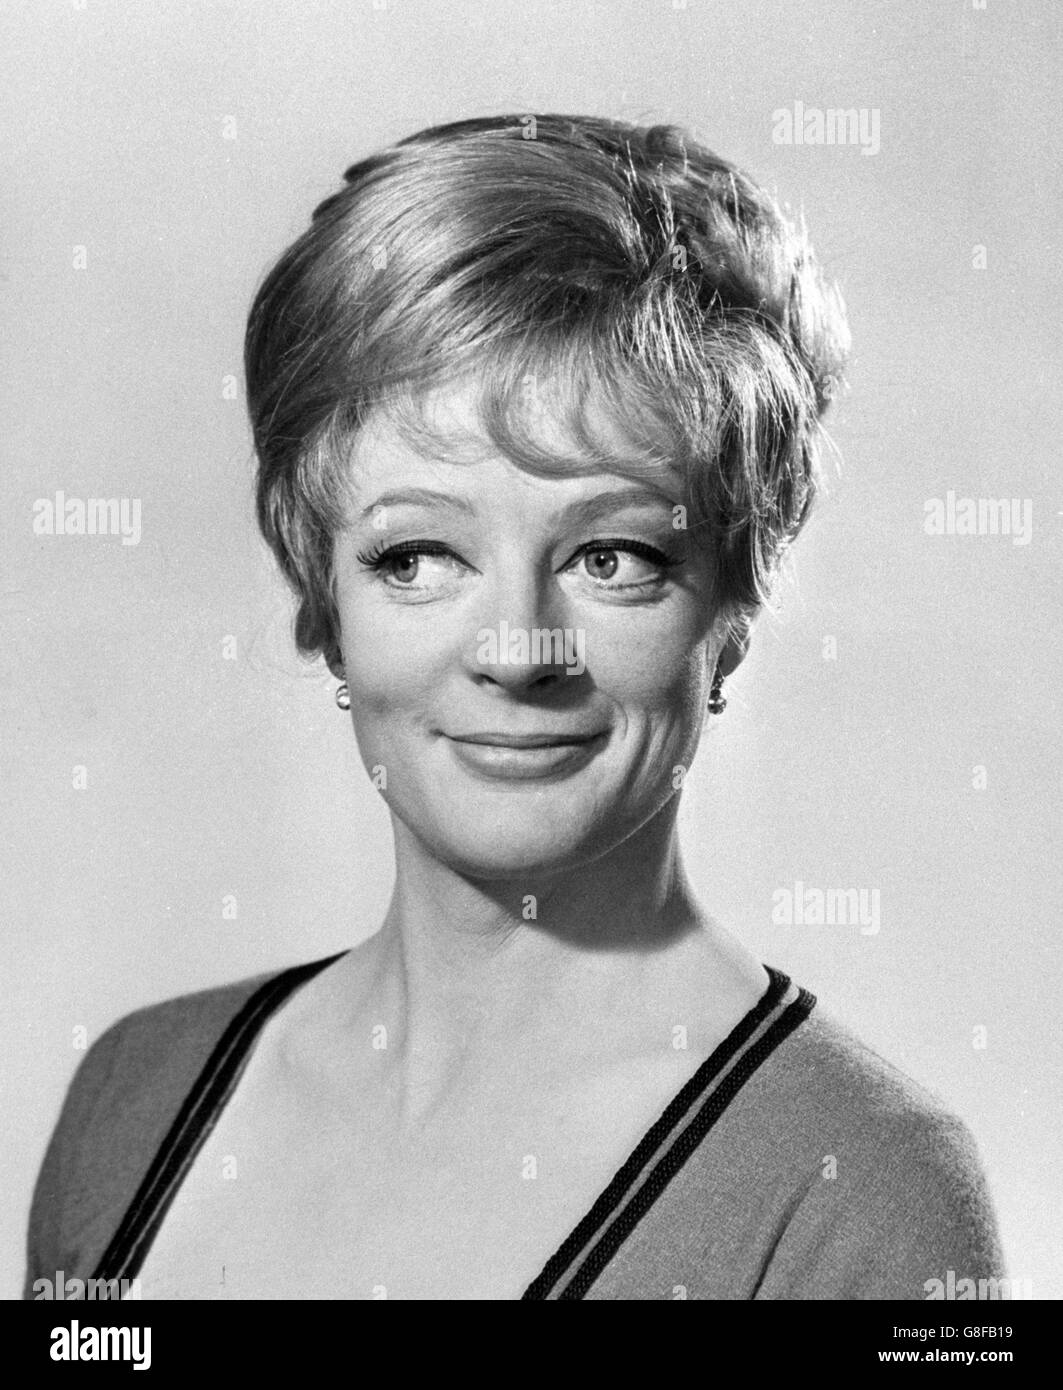 Pictures maggie smith young Maggie Smith